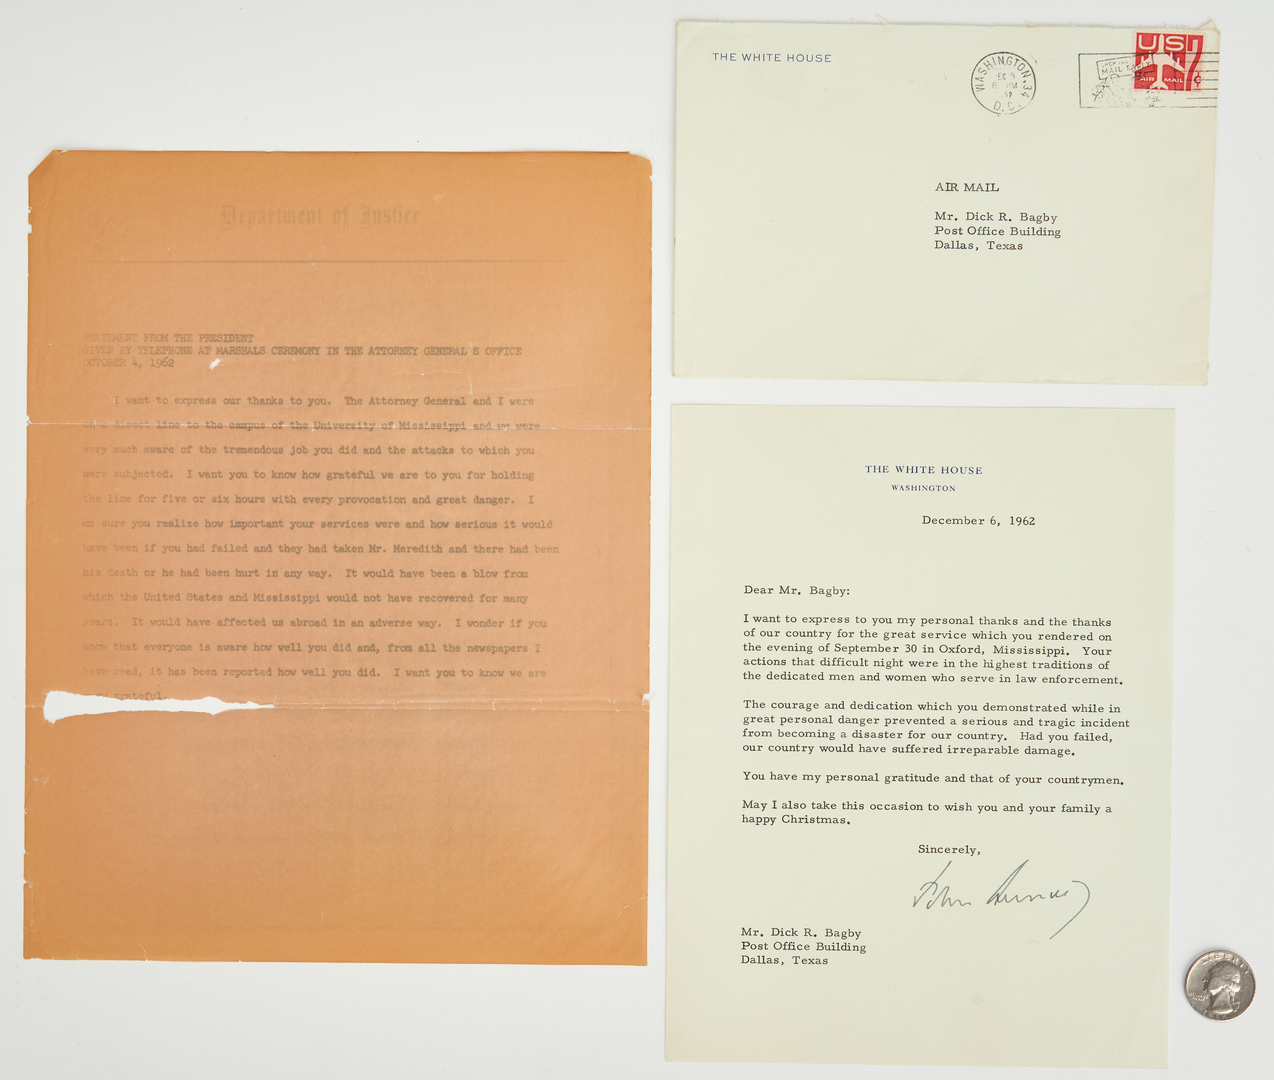 Lot 639: JFK and RFK Letters & Archive, U.S. Marshal Dick Bagby